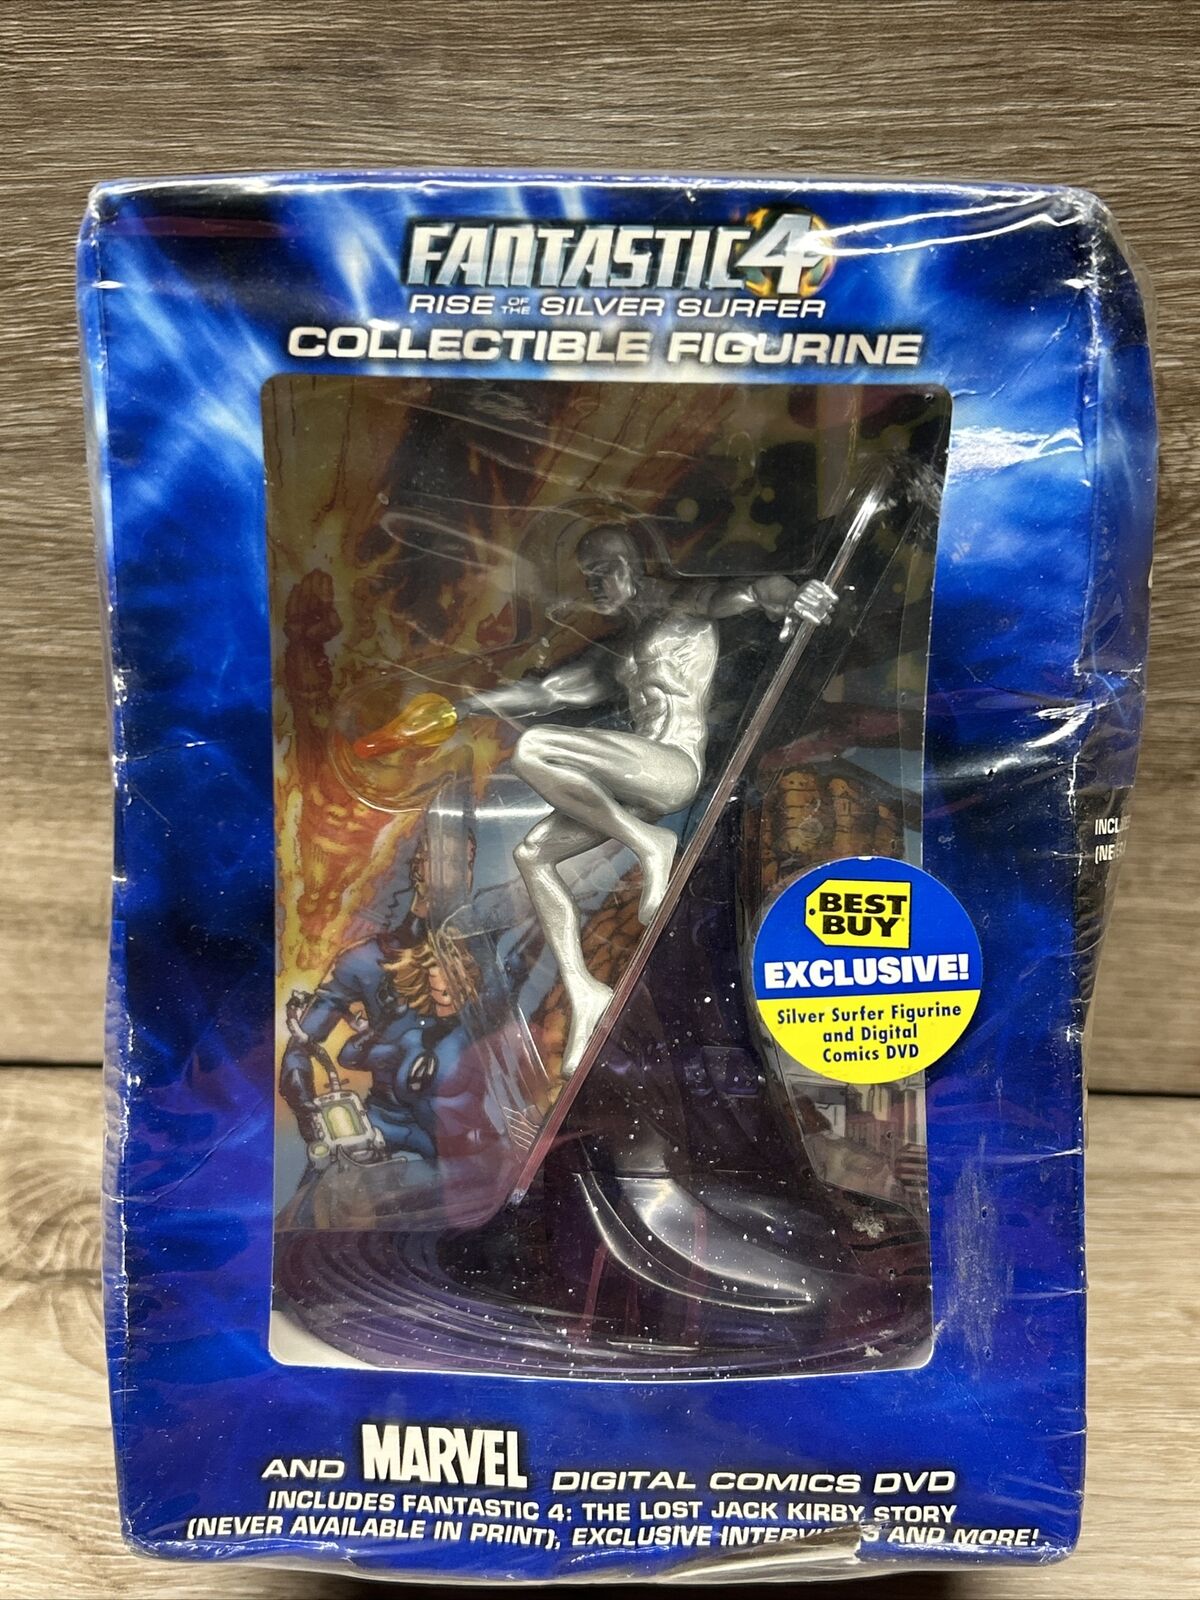 Fantastic Four Rise Of The Silver Surfer Collectible Figurine 2007 Best Buy